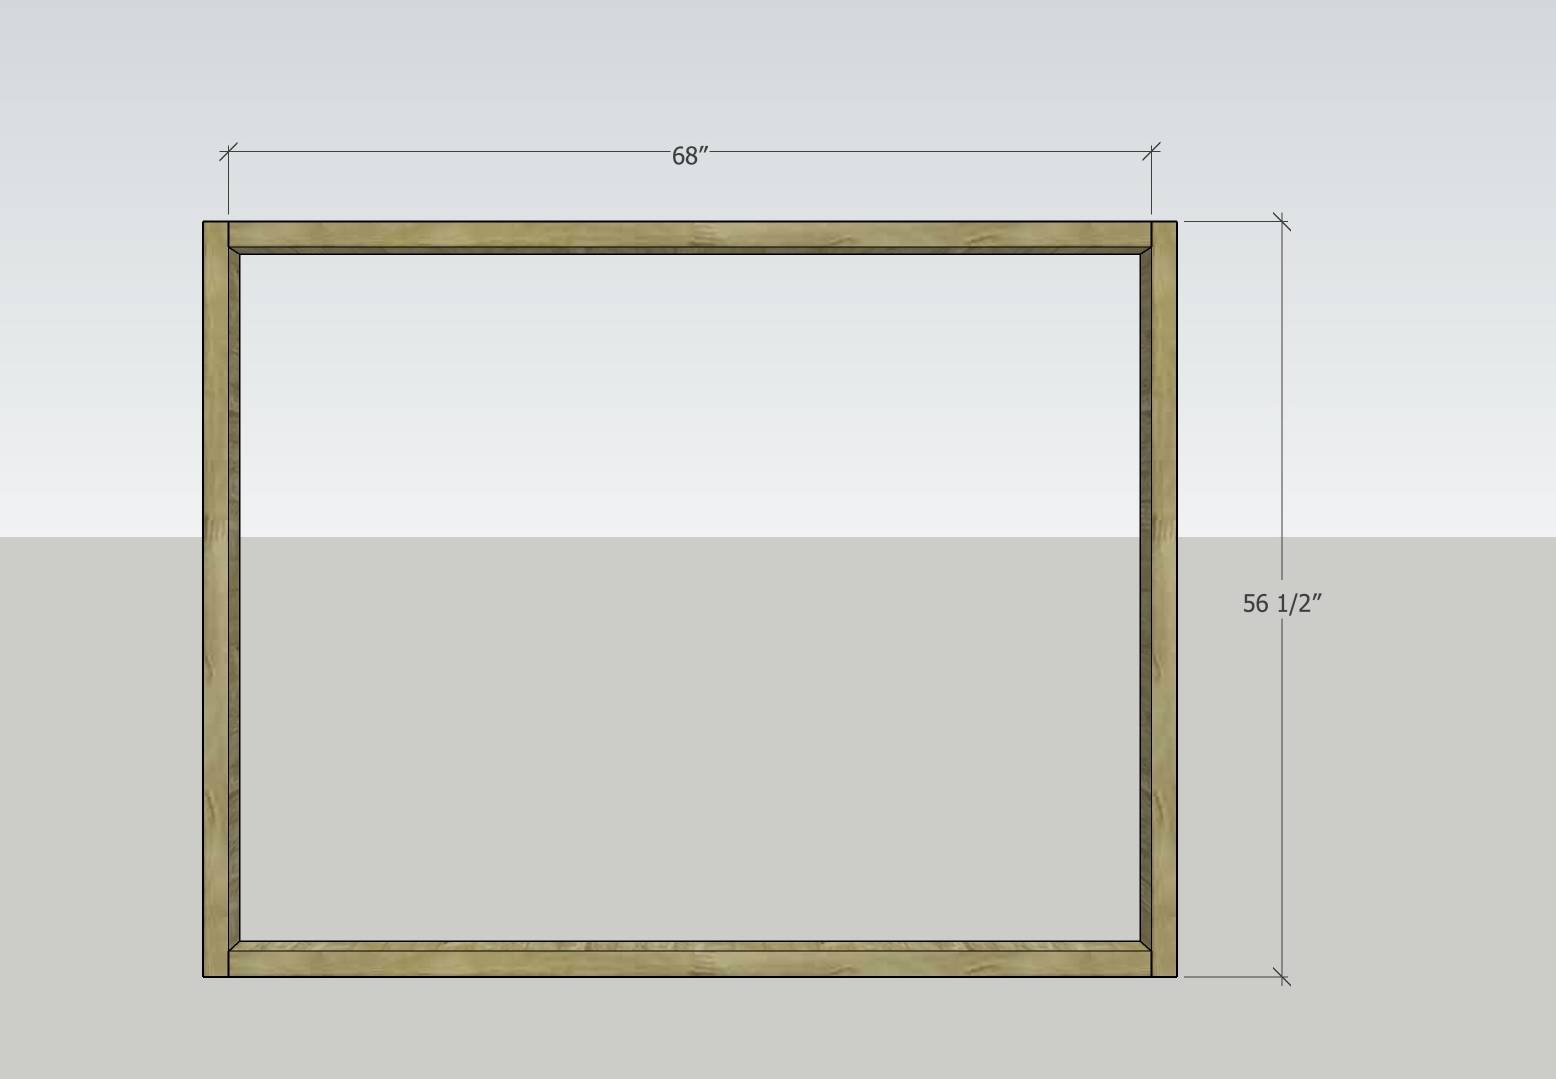 56 ½ inches long and 68 inches width wooden frame.